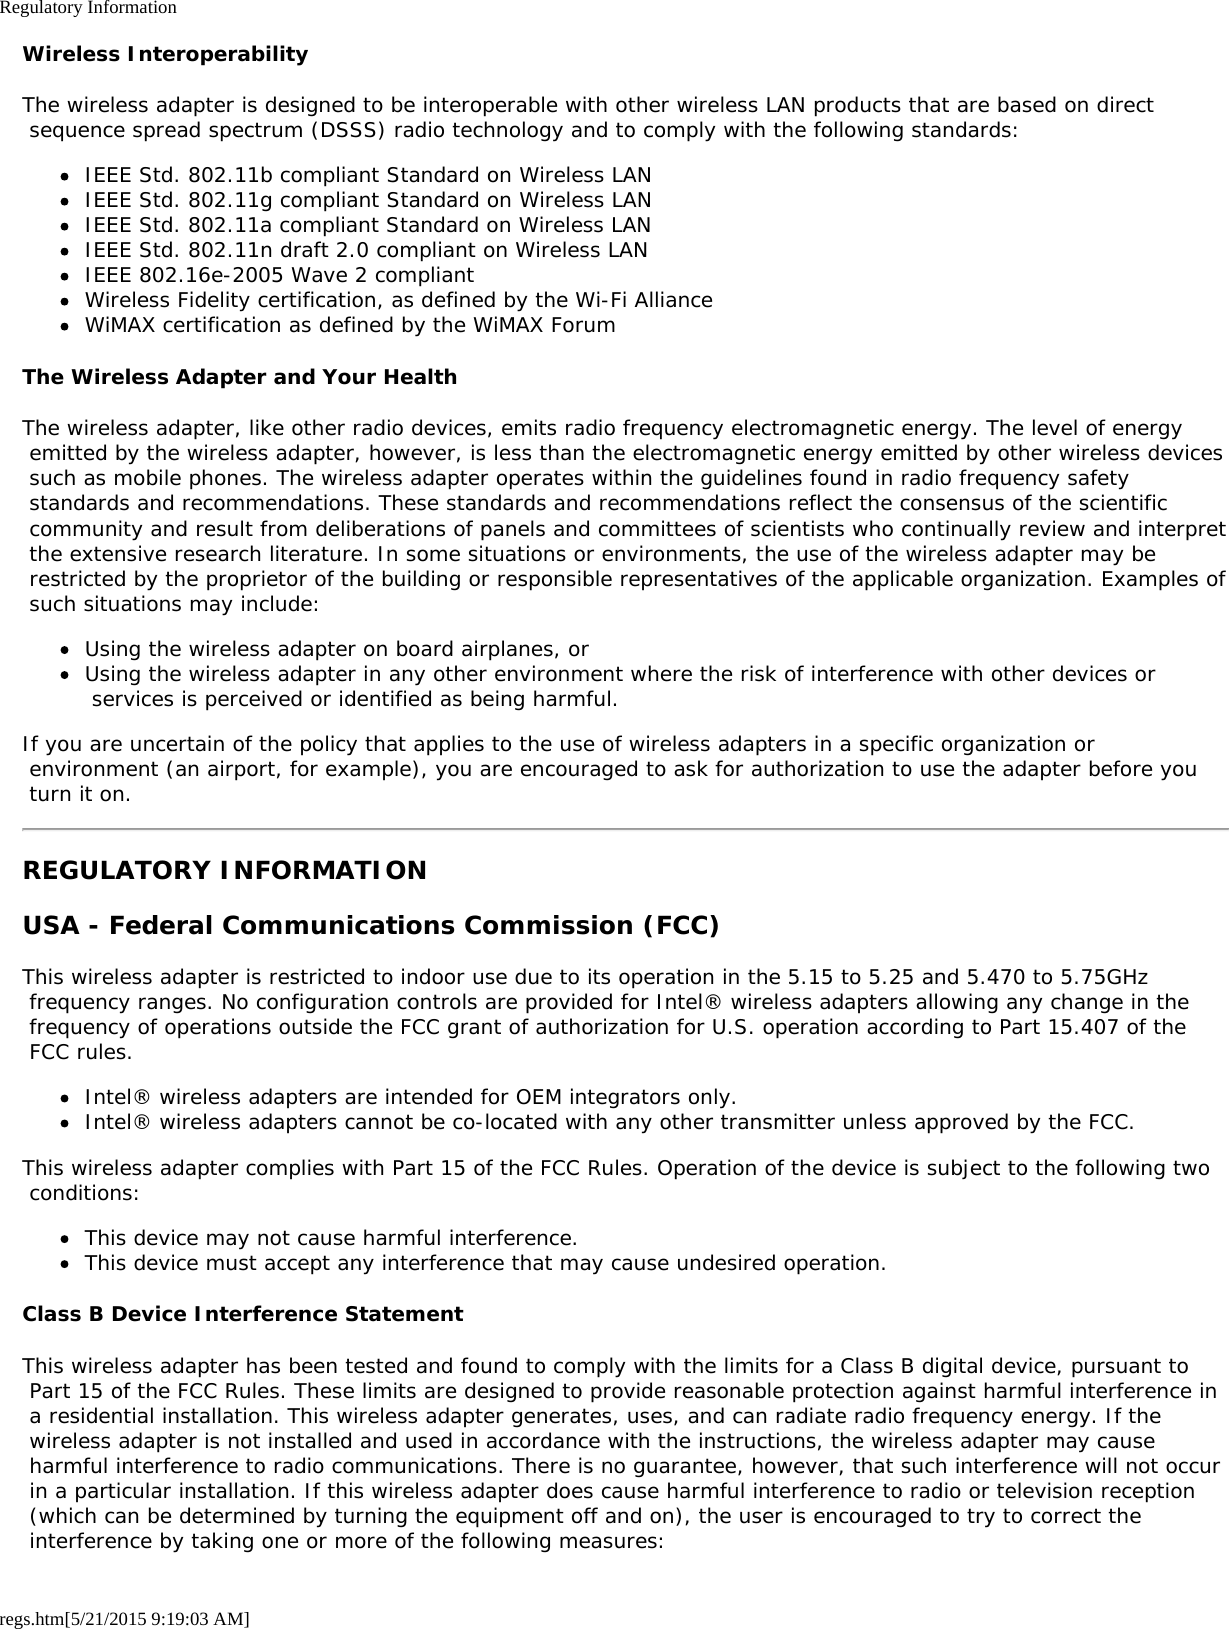 Regulatory Informationregs.htm[5/21/2015 9:19:03 AM]Wireless InteroperabilityThe wireless adapter is designed to be interoperable with other wireless LAN products that are based on direct sequence spread spectrum (DSSS) radio technology and to comply with the following standards:IEEE Std. 802.11b compliant Standard on Wireless LANIEEE Std. 802.11g compliant Standard on Wireless LANIEEE Std. 802.11a compliant Standard on Wireless LANIEEE Std. 802.11n draft 2.0 compliant on Wireless LANIEEE 802.16e-2005 Wave 2 compliantWireless Fidelity certification, as defined by the Wi-Fi AllianceWiMAX certification as defined by the WiMAX ForumThe Wireless Adapter and Your HealthThe wireless adapter, like other radio devices, emits radio frequency electromagnetic energy. The level of energy emitted by the wireless adapter, however, is less than the electromagnetic energy emitted by other wireless devices such as mobile phones. The wireless adapter operates within the guidelines found in radio frequency safety standards and recommendations. These standards and recommendations reflect the consensus of the scientific community and result from deliberations of panels and committees of scientists who continually review and interpret the extensive research literature. In some situations or environments, the use of the wireless adapter may be restricted by the proprietor of the building or responsible representatives of the applicable organization. Examples of such situations may include:Using the wireless adapter on board airplanes, orUsing the wireless adapter in any other environment where the risk of interference with other devices or services is perceived or identified as being harmful.If you are uncertain of the policy that applies to the use of wireless adapters in a specific organization or environment (an airport, for example), you are encouraged to ask for authorization to use the adapter before you turn it on.REGULATORY INFORMATIONUSA - Federal Communications Commission (FCC)This wireless adapter is restricted to indoor use due to its operation in the 5.15 to 5.25 and 5.470 to 5.75GHz frequency ranges. No configuration controls are provided for Intel® wireless adapters allowing any change in the frequency of operations outside the FCC grant of authorization for U.S. operation according to Part 15.407 of the FCC rules.Intel® wireless adapters are intended for OEM integrators only.Intel® wireless adapters cannot be co-located with any other transmitter unless approved by the FCC.This wireless adapter complies with Part 15 of the FCC Rules. Operation of the device is subject to the following two conditions:This device may not cause harmful interference.This device must accept any interference that may cause undesired operation.Class B Device Interference StatementThis wireless adapter has been tested and found to comply with the limits for a Class B digital device, pursuant to Part 15 of the FCC Rules. These limits are designed to provide reasonable protection against harmful interference in a residential installation. This wireless adapter generates, uses, and can radiate radio frequency energy. If the wireless adapter is not installed and used in accordance with the instructions, the wireless adapter may cause harmful interference to radio communications. There is no guarantee, however, that such interference will not occur in a particular installation. If this wireless adapter does cause harmful interference to radio or television reception (which can be determined by turning the equipment off and on), the user is encouraged to try to correct the interference by taking one or more of the following measures: